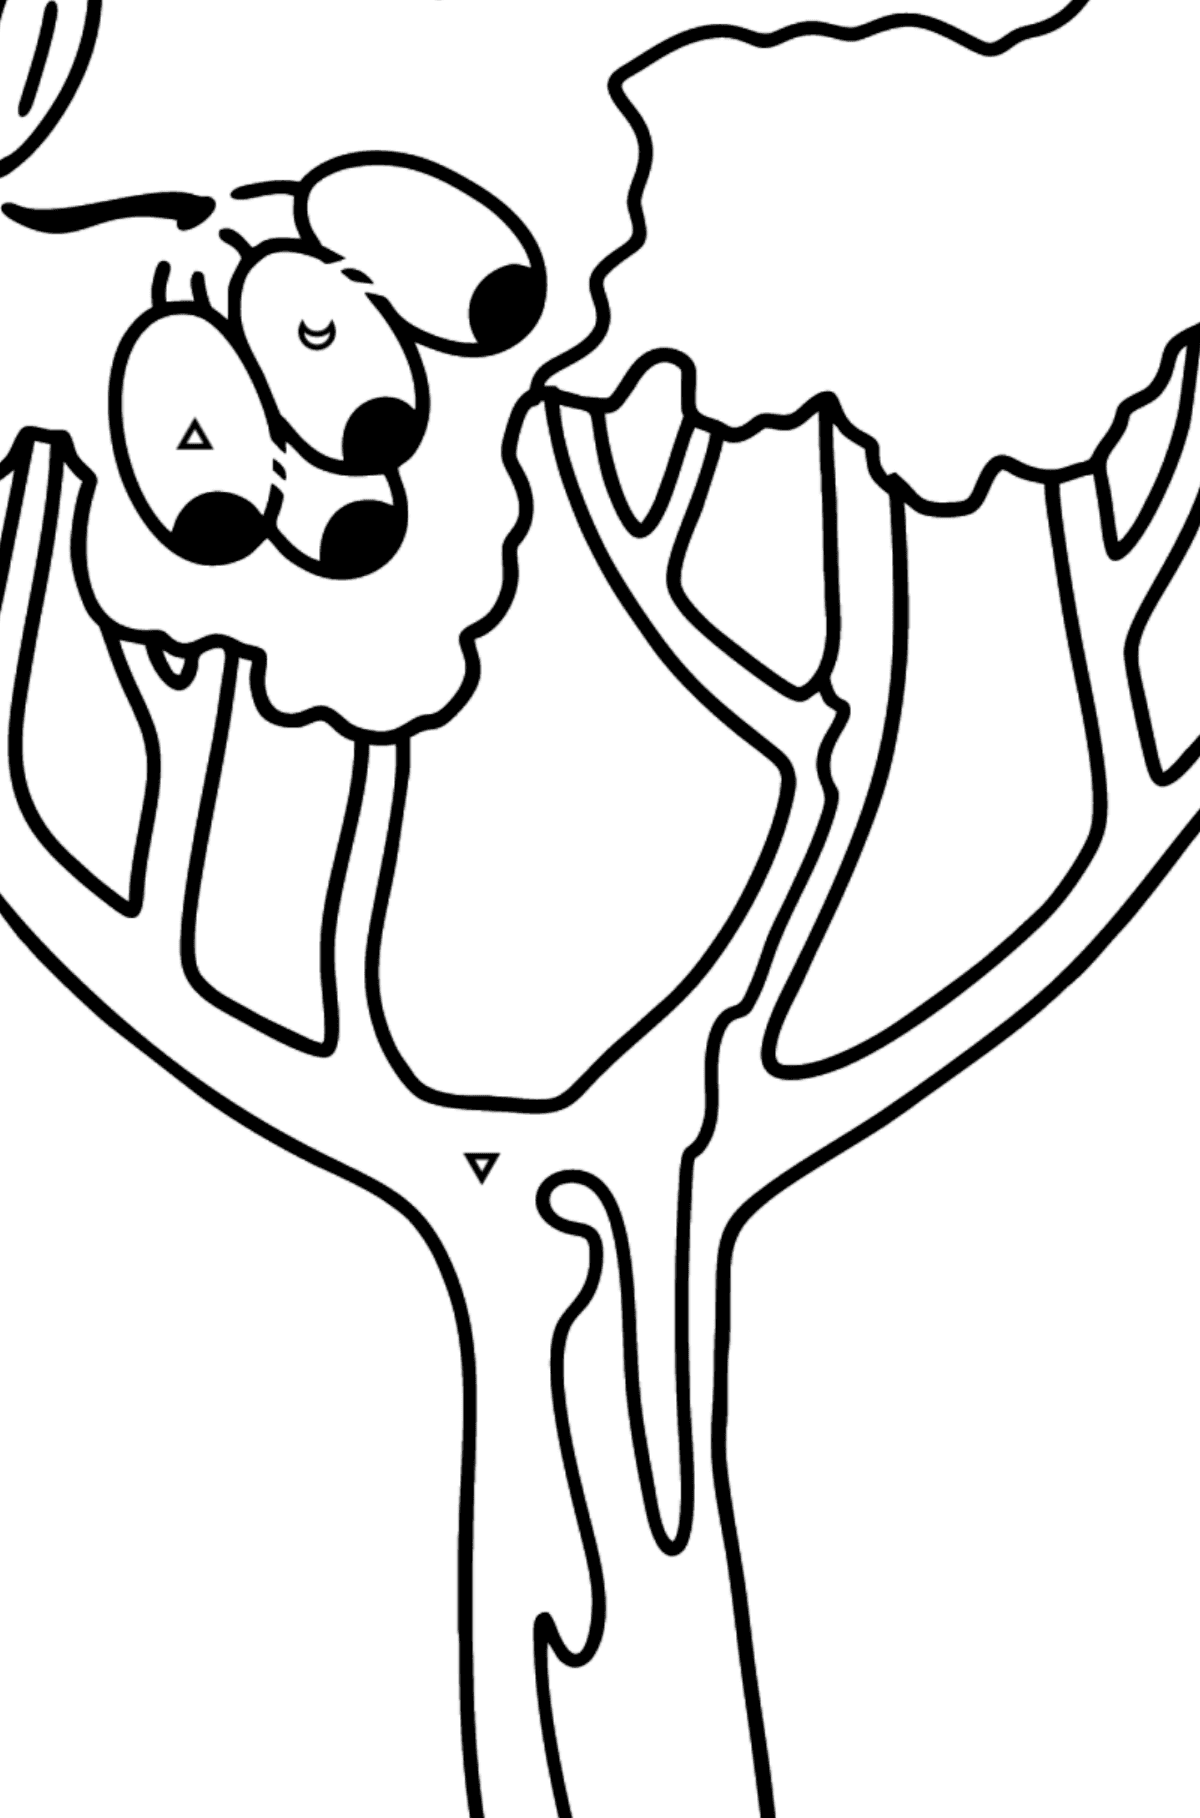 Gum tree - Corimbia coloring page - Coloring by Symbols for Kids